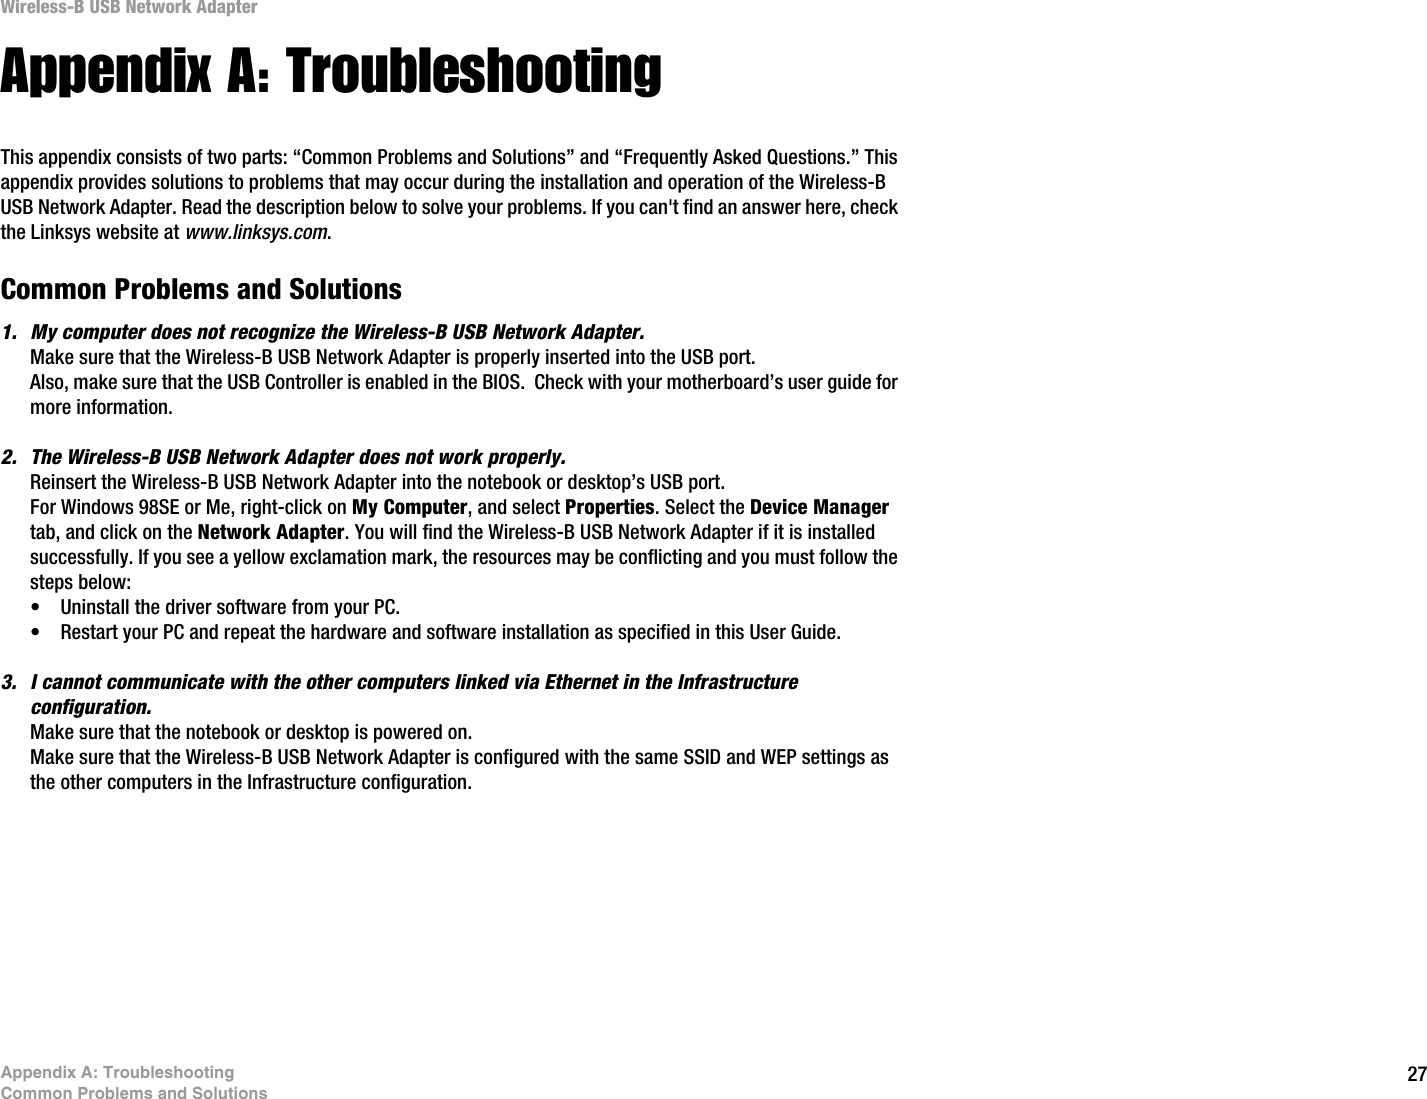 27Appendix A: TroubleshootingCommon Problems and SolutionsWireless-B USB Network AdapterAppendix A: TroubleshootingThis appendix consists of two parts: “Common Problems and Solutions” and “Frequently Asked Questions.” This appendix provides solutions to problems that may occur during the installation and operation of the Wireless-B USB Network Adapter. Read the description below to solve your problems. If you can&apos;t find an answer here, check the Linksys website at www.linksys.com.Common Problems and Solutions1. My computer does not recognize the Wireless-B USB Network Adapter.Make sure that the Wireless-B USB Network Adapter is properly inserted into the USB port.Also, make sure that the USB Controller is enabled in the BIOS.  Check with your motherboard’s user guide for more information.2. The Wireless-B USB Network Adapter does not work properly.Reinsert the Wireless-B USB Network Adapter into the notebook or desktop’s USB port. For Windows 98SE or Me, right-click on My Computer, and select Properties. Select the Device Manager tab, and click on the Network Adapter. You will find the Wireless-B USB Network Adapter if it is installed successfully. If you see a yellow exclamation mark, the resources may be conflicting and you must follow the steps below:• Uninstall the driver software from your PC.• Restart your PC and repeat the hardware and software installation as specified in this User Guide.3. I cannot communicate with the other computers linked via Ethernet in the Infrastructure configuration.Make sure that the notebook or desktop is powered on.Make sure that the Wireless-B USB Network Adapter is configured with the same SSID and WEP settings as the other computers in the Infrastructure configuration. 